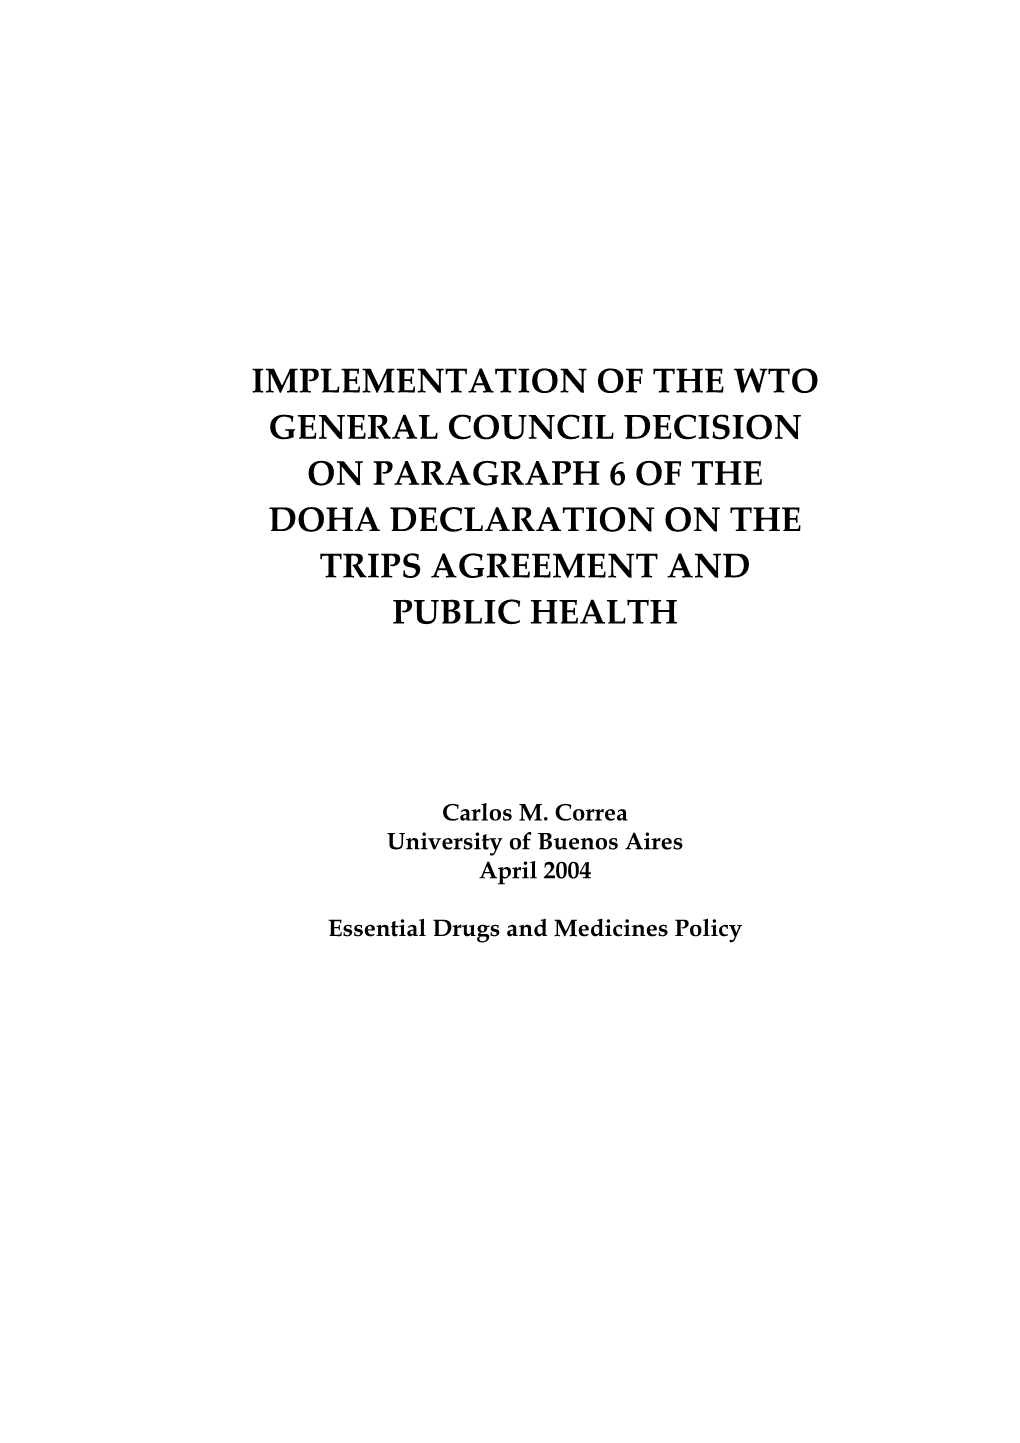 Implementation of the Wto General Council Decision on Paragraph 6 of the Doha Declaration on the Trips Agreement and Public Health